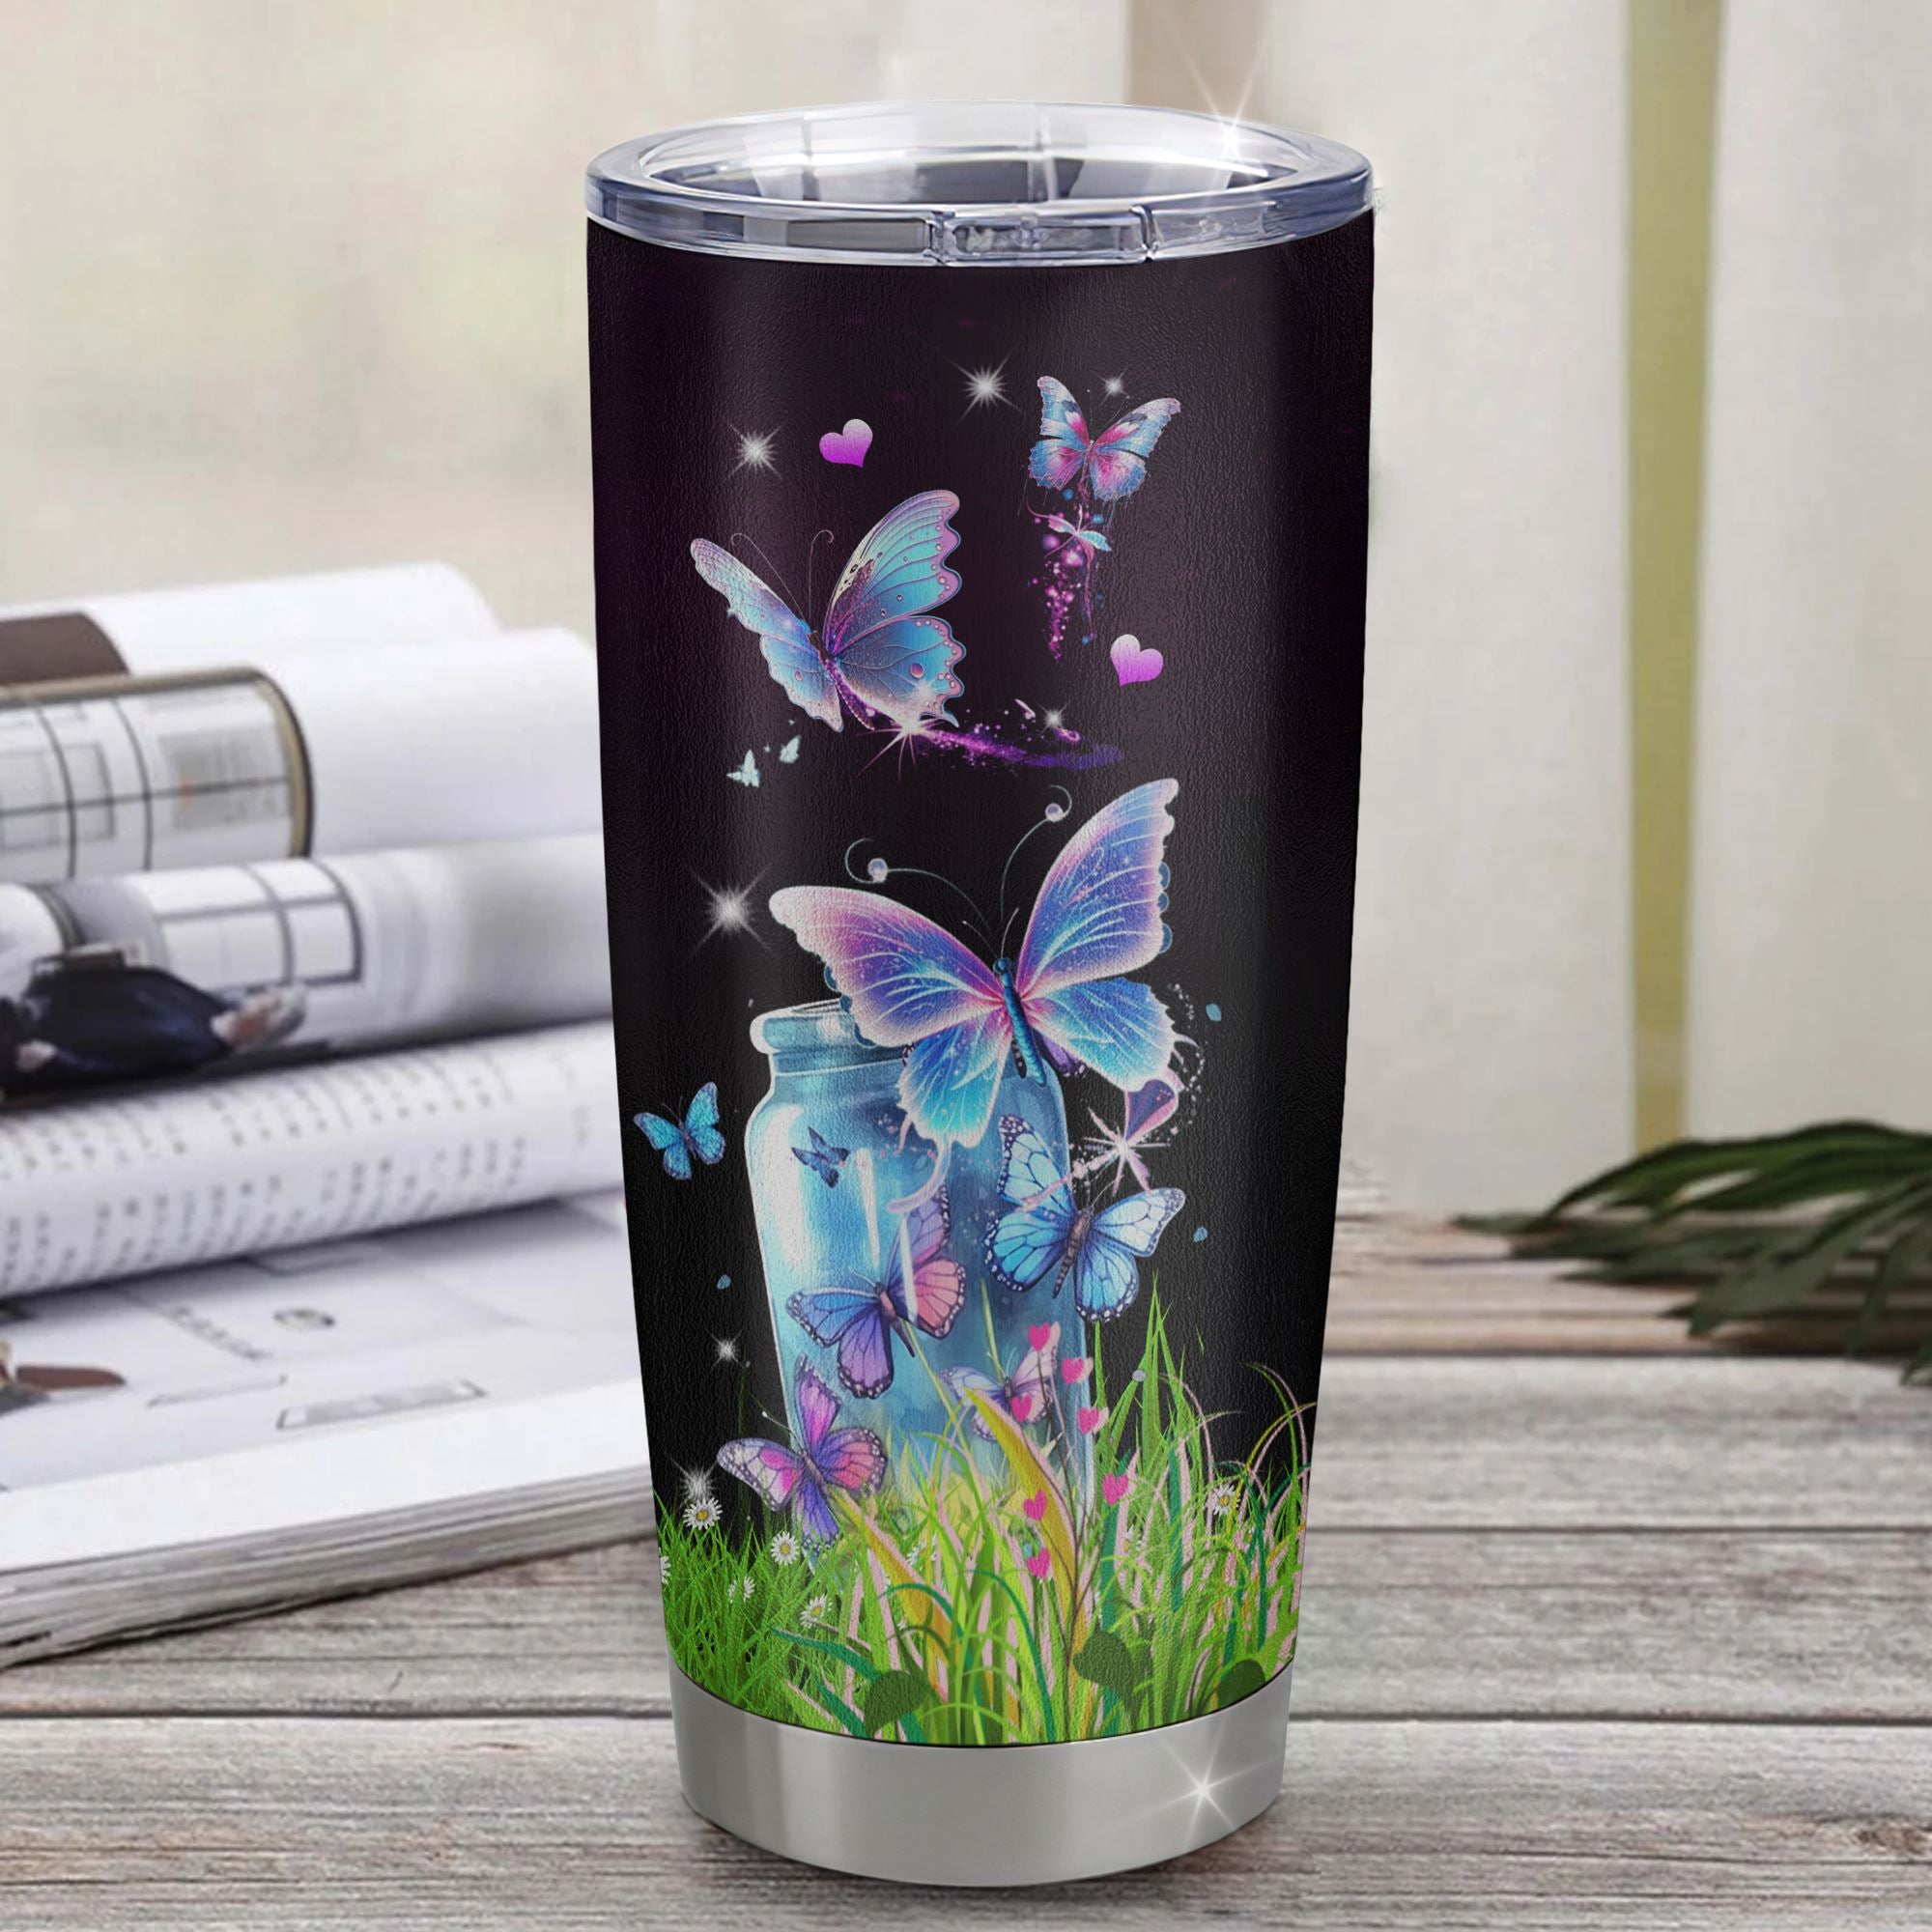 19 & Fabulous 20oz Stainless Steel Tumbler 19 Year Old Birthday Gifts for Her, 19th Birthday Decorations for Women, 19 Year Old Gifts, 19th Birthday